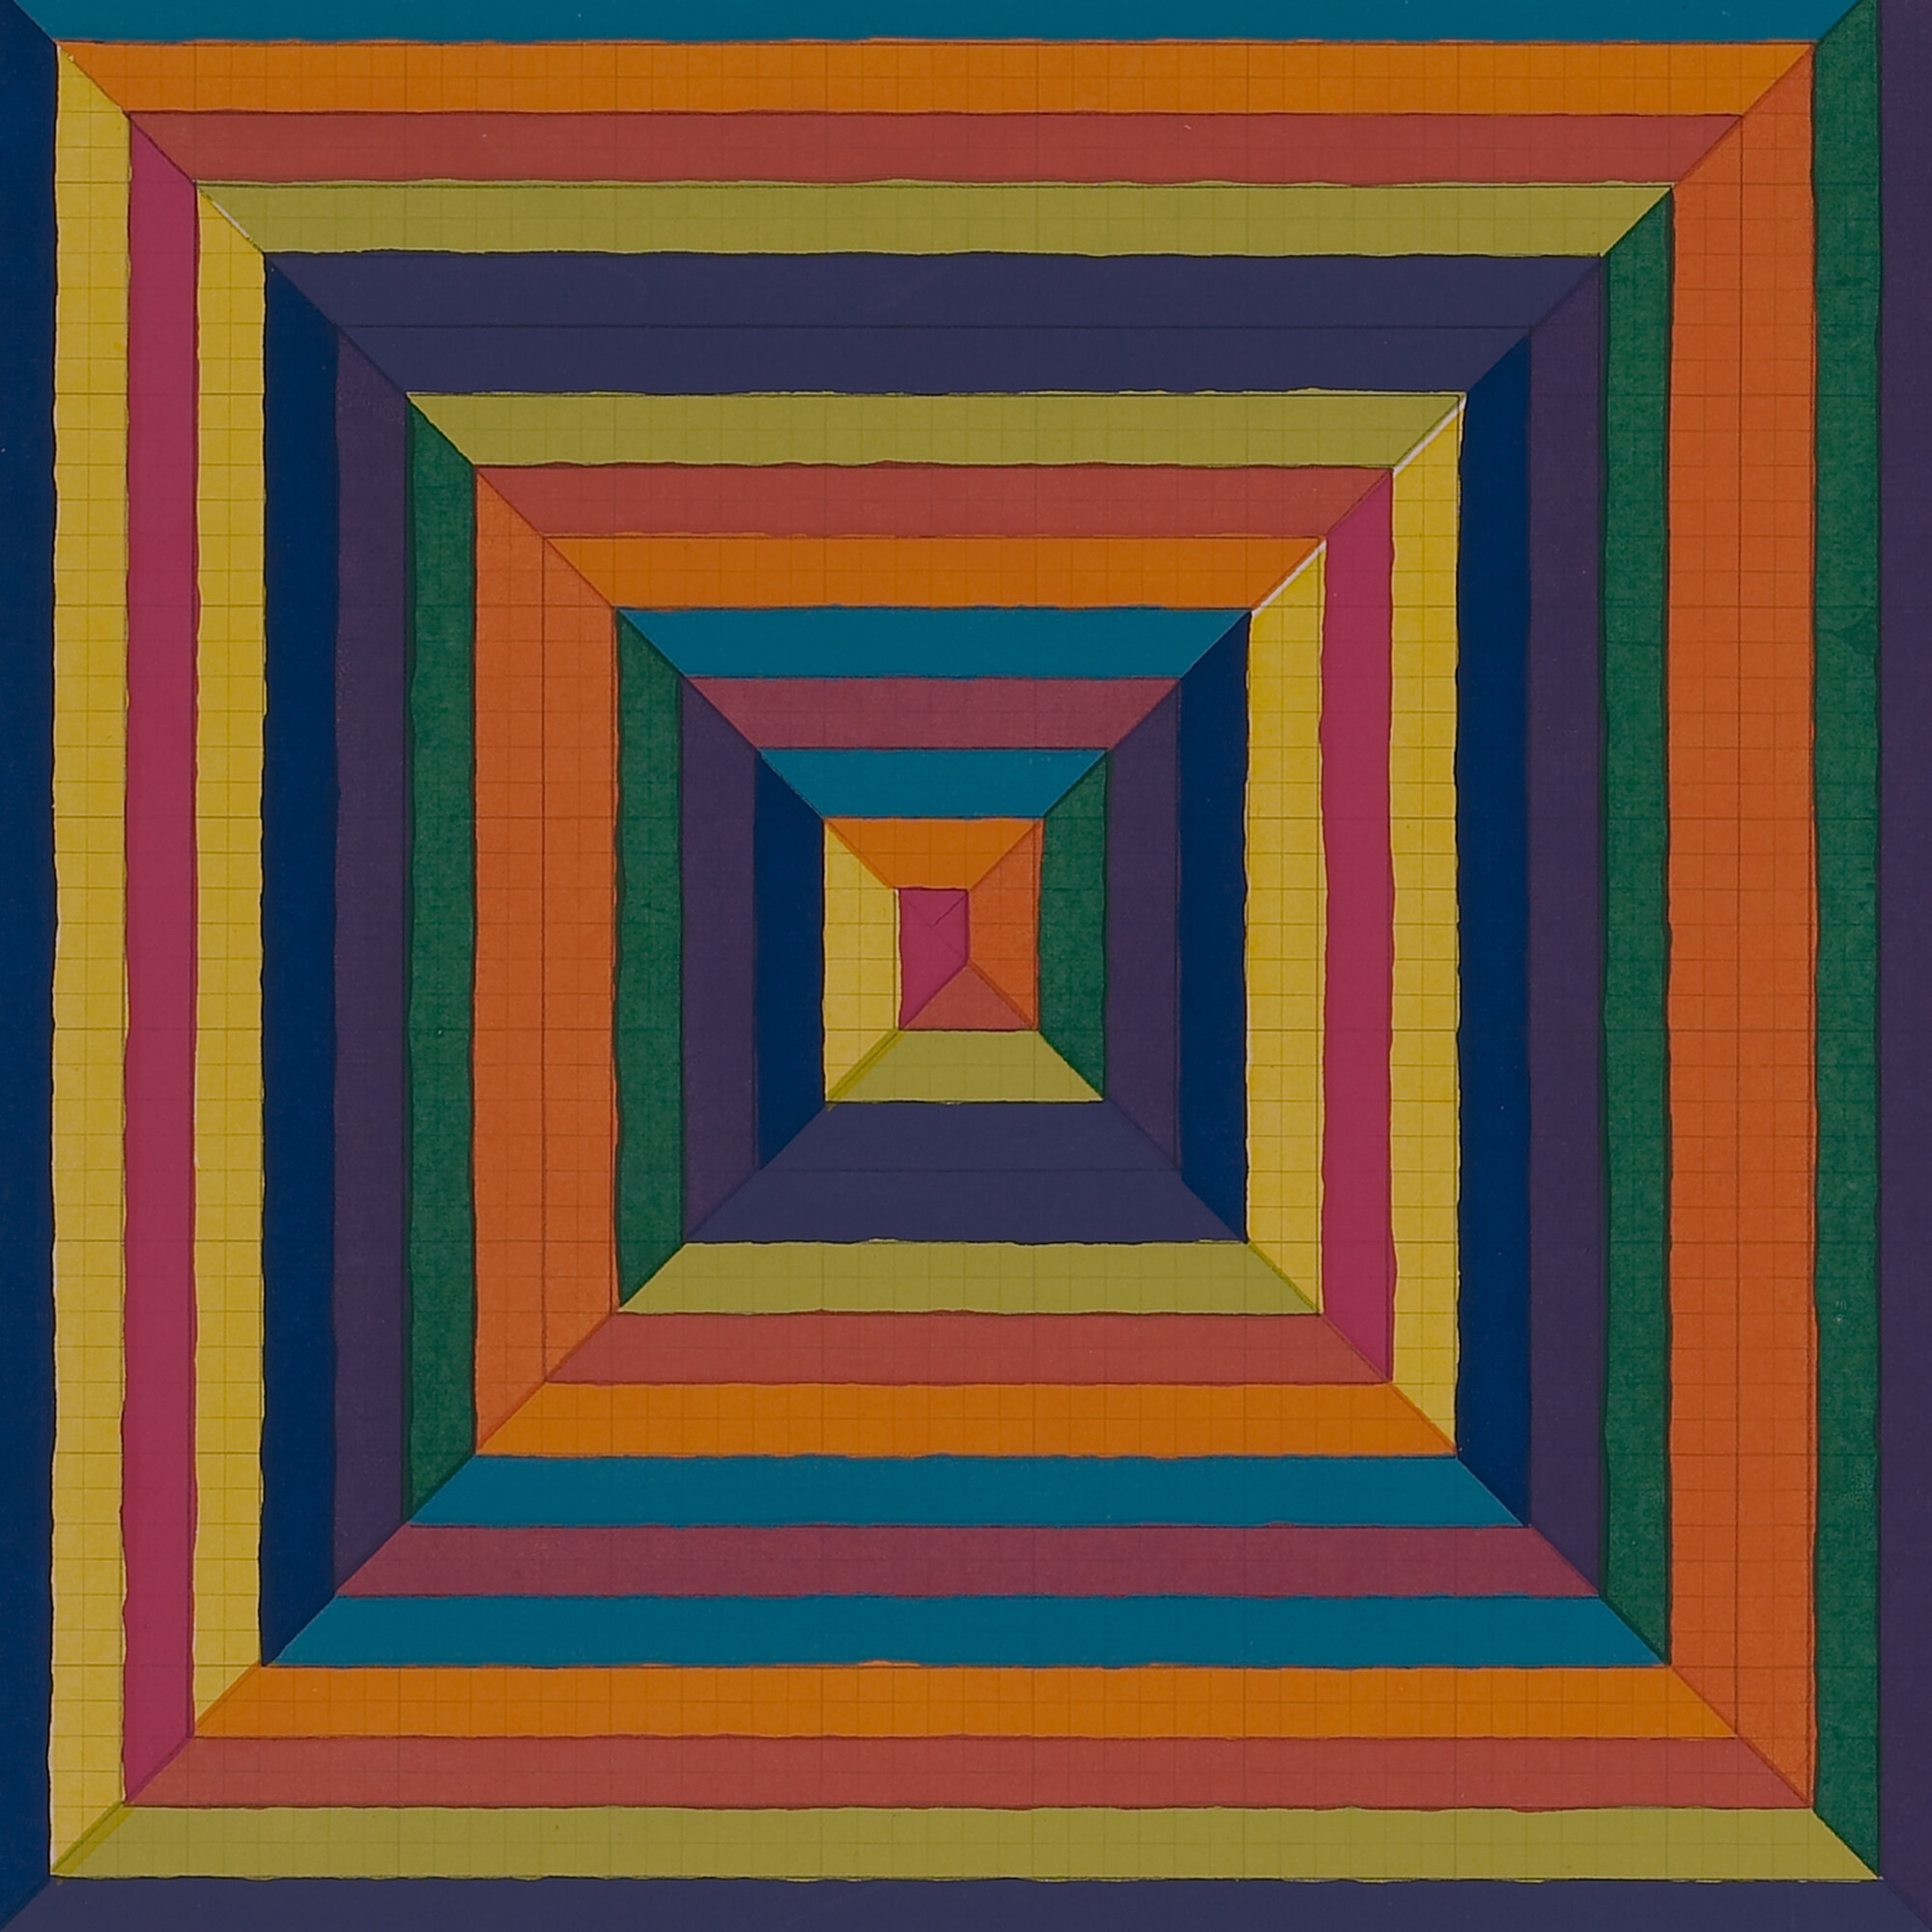 534: FRANK STELLA, Effingham (from the Eccentric Polygons series 